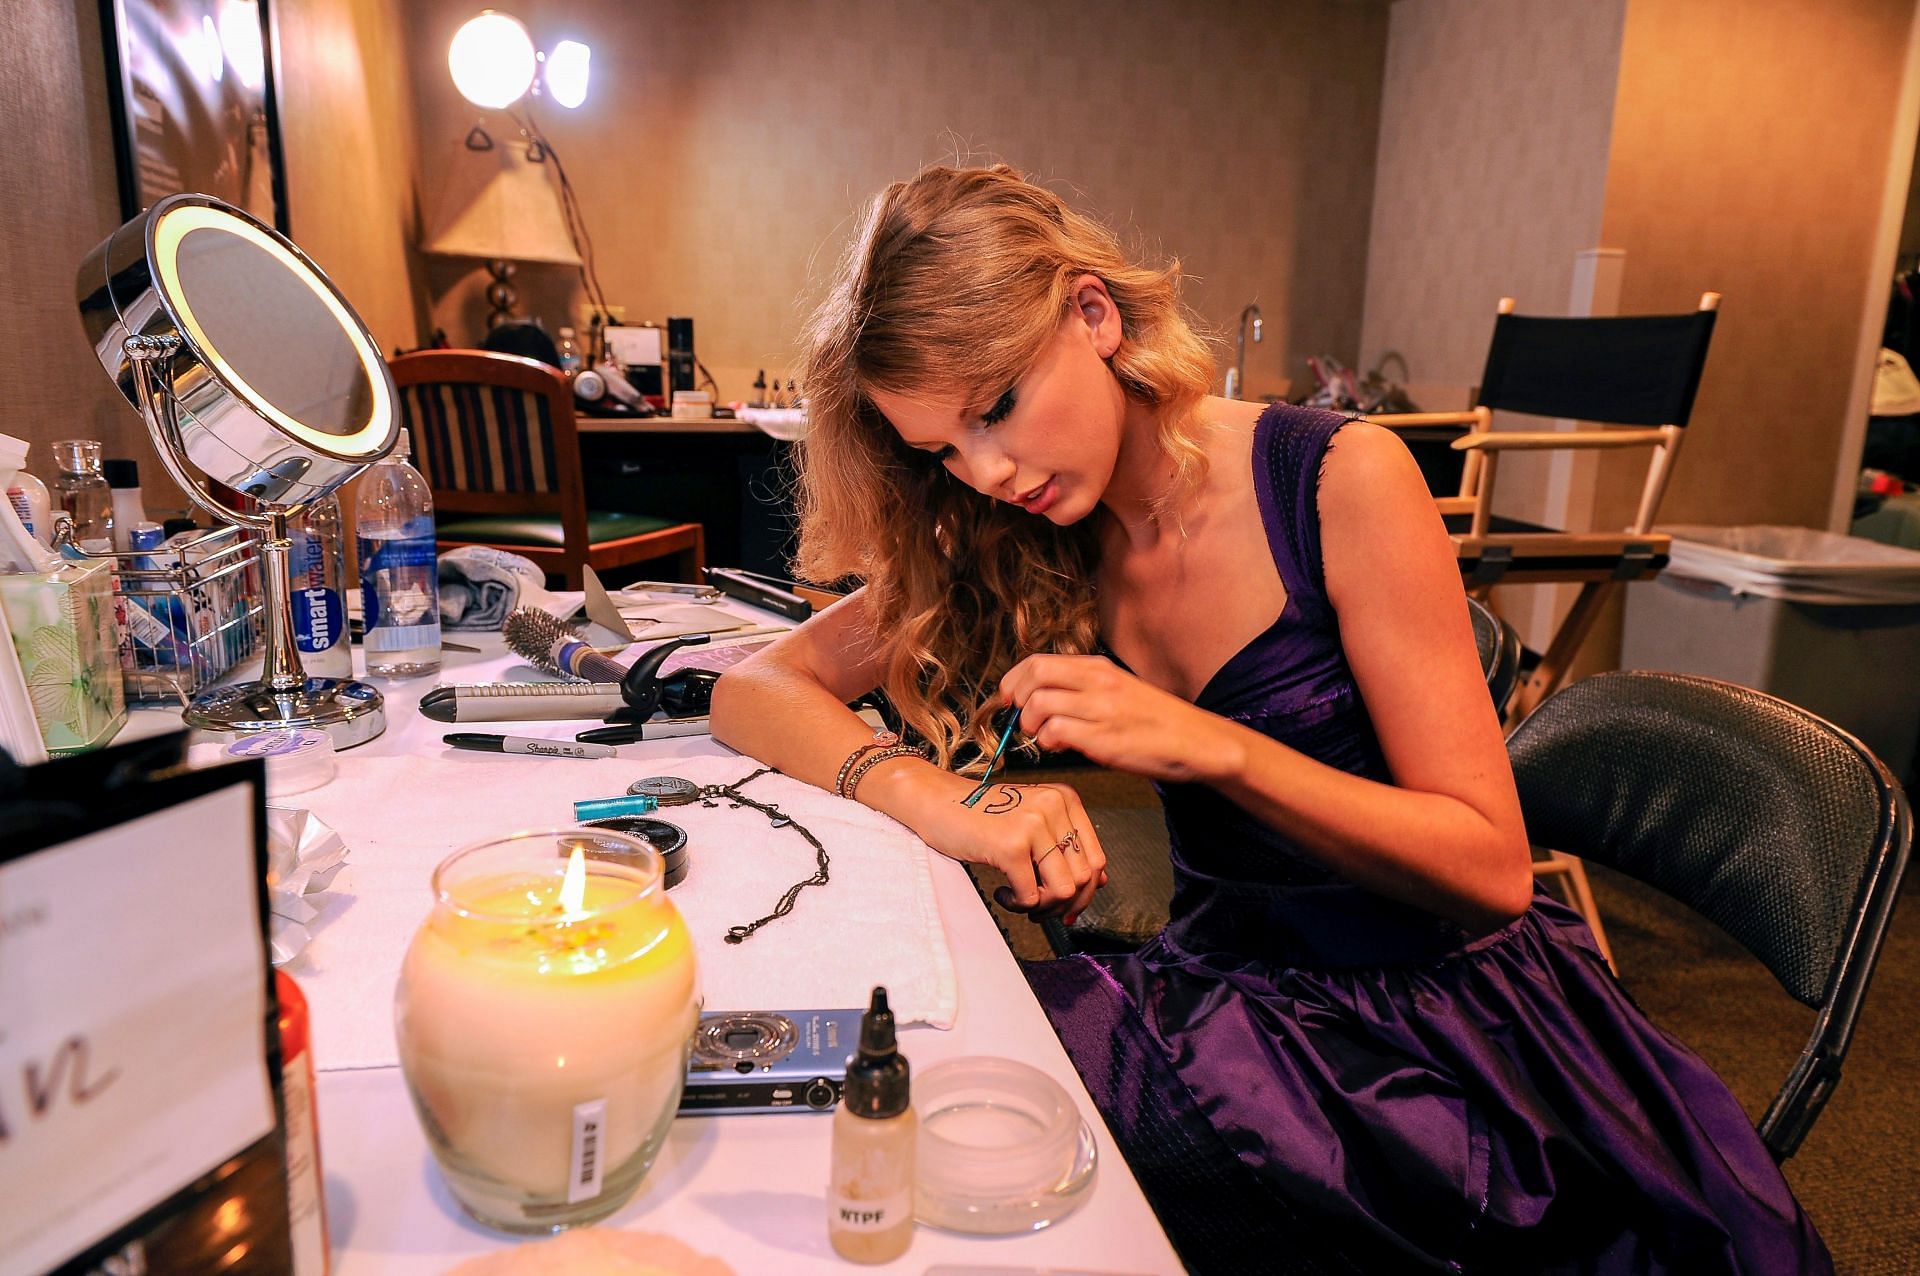 Taylor Swift Fearless Tour 2009 In New York City (Photo by Larry Busacca/Getty Images for Erickson Public)